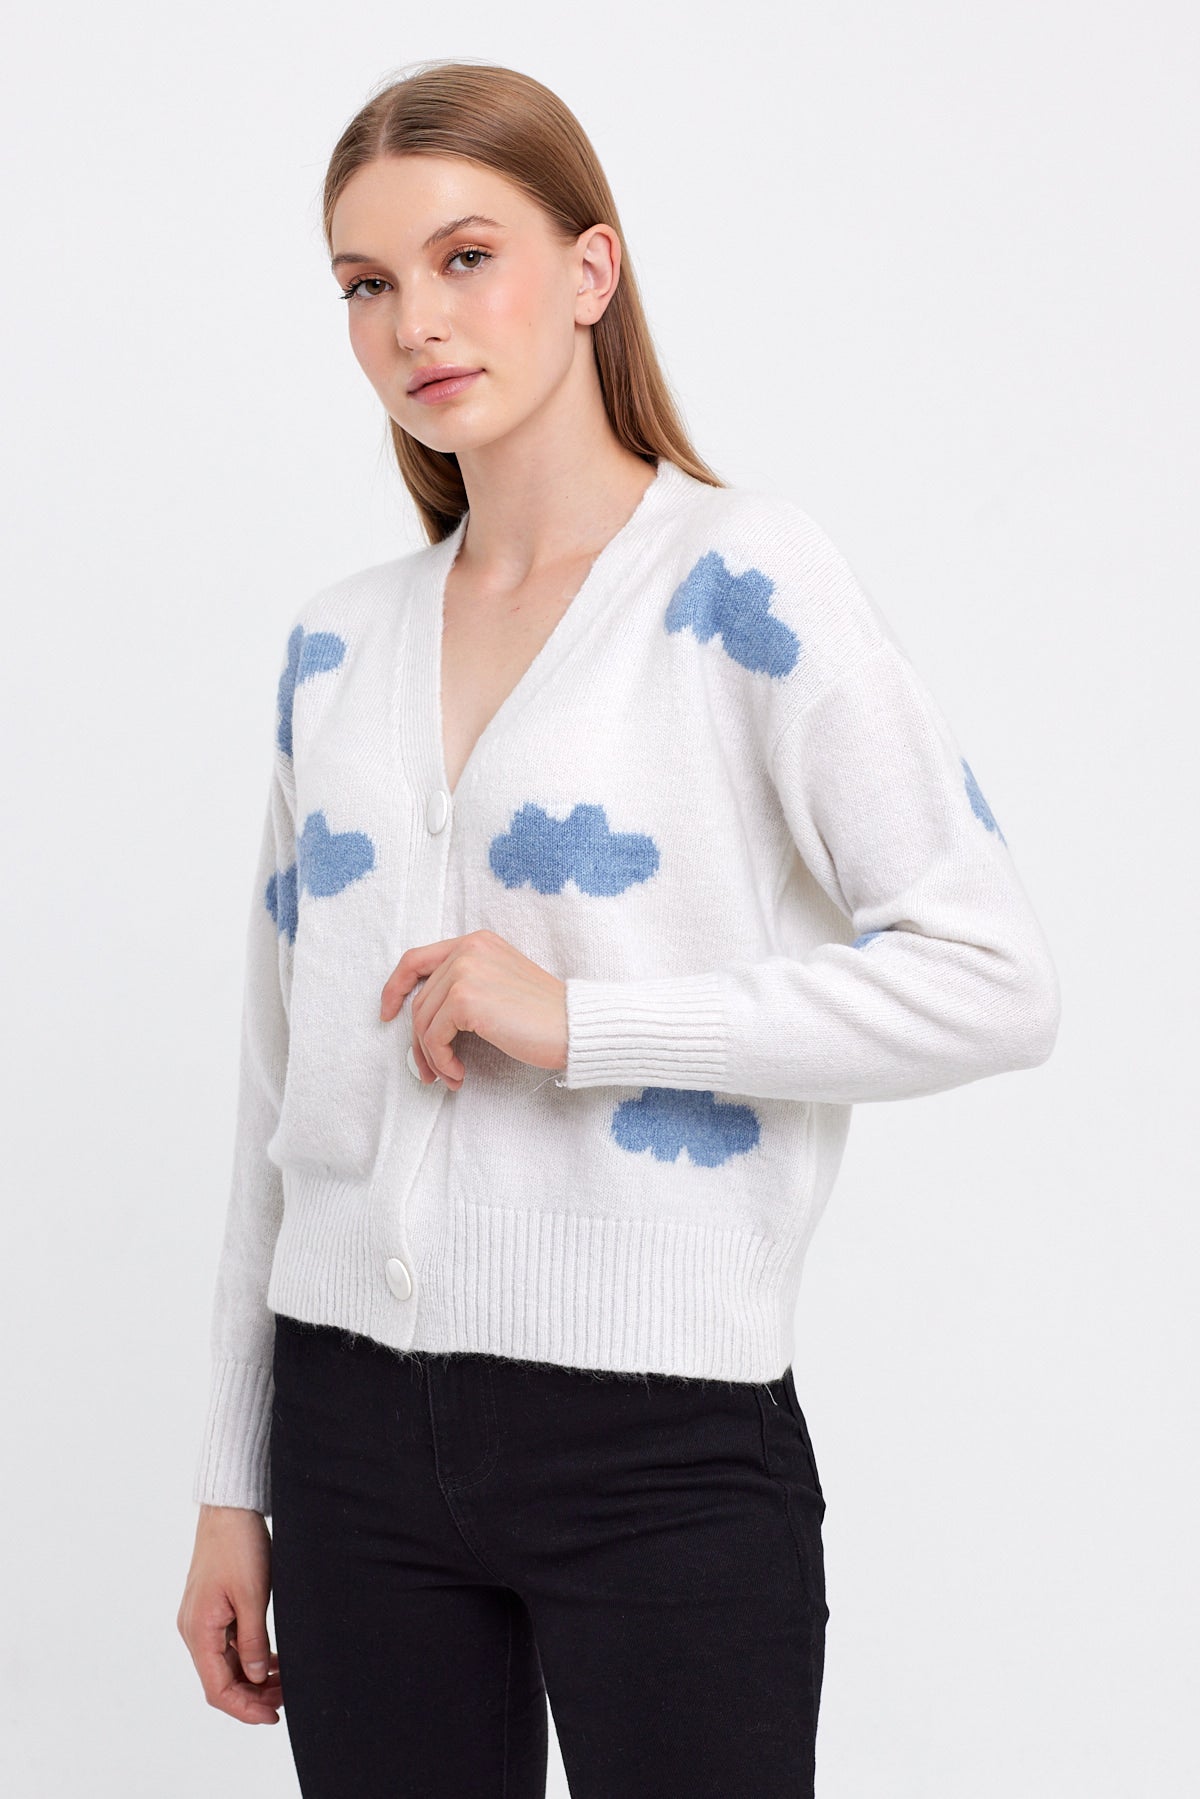 Cloud Knit Cardigan Cropped - Cute Collection